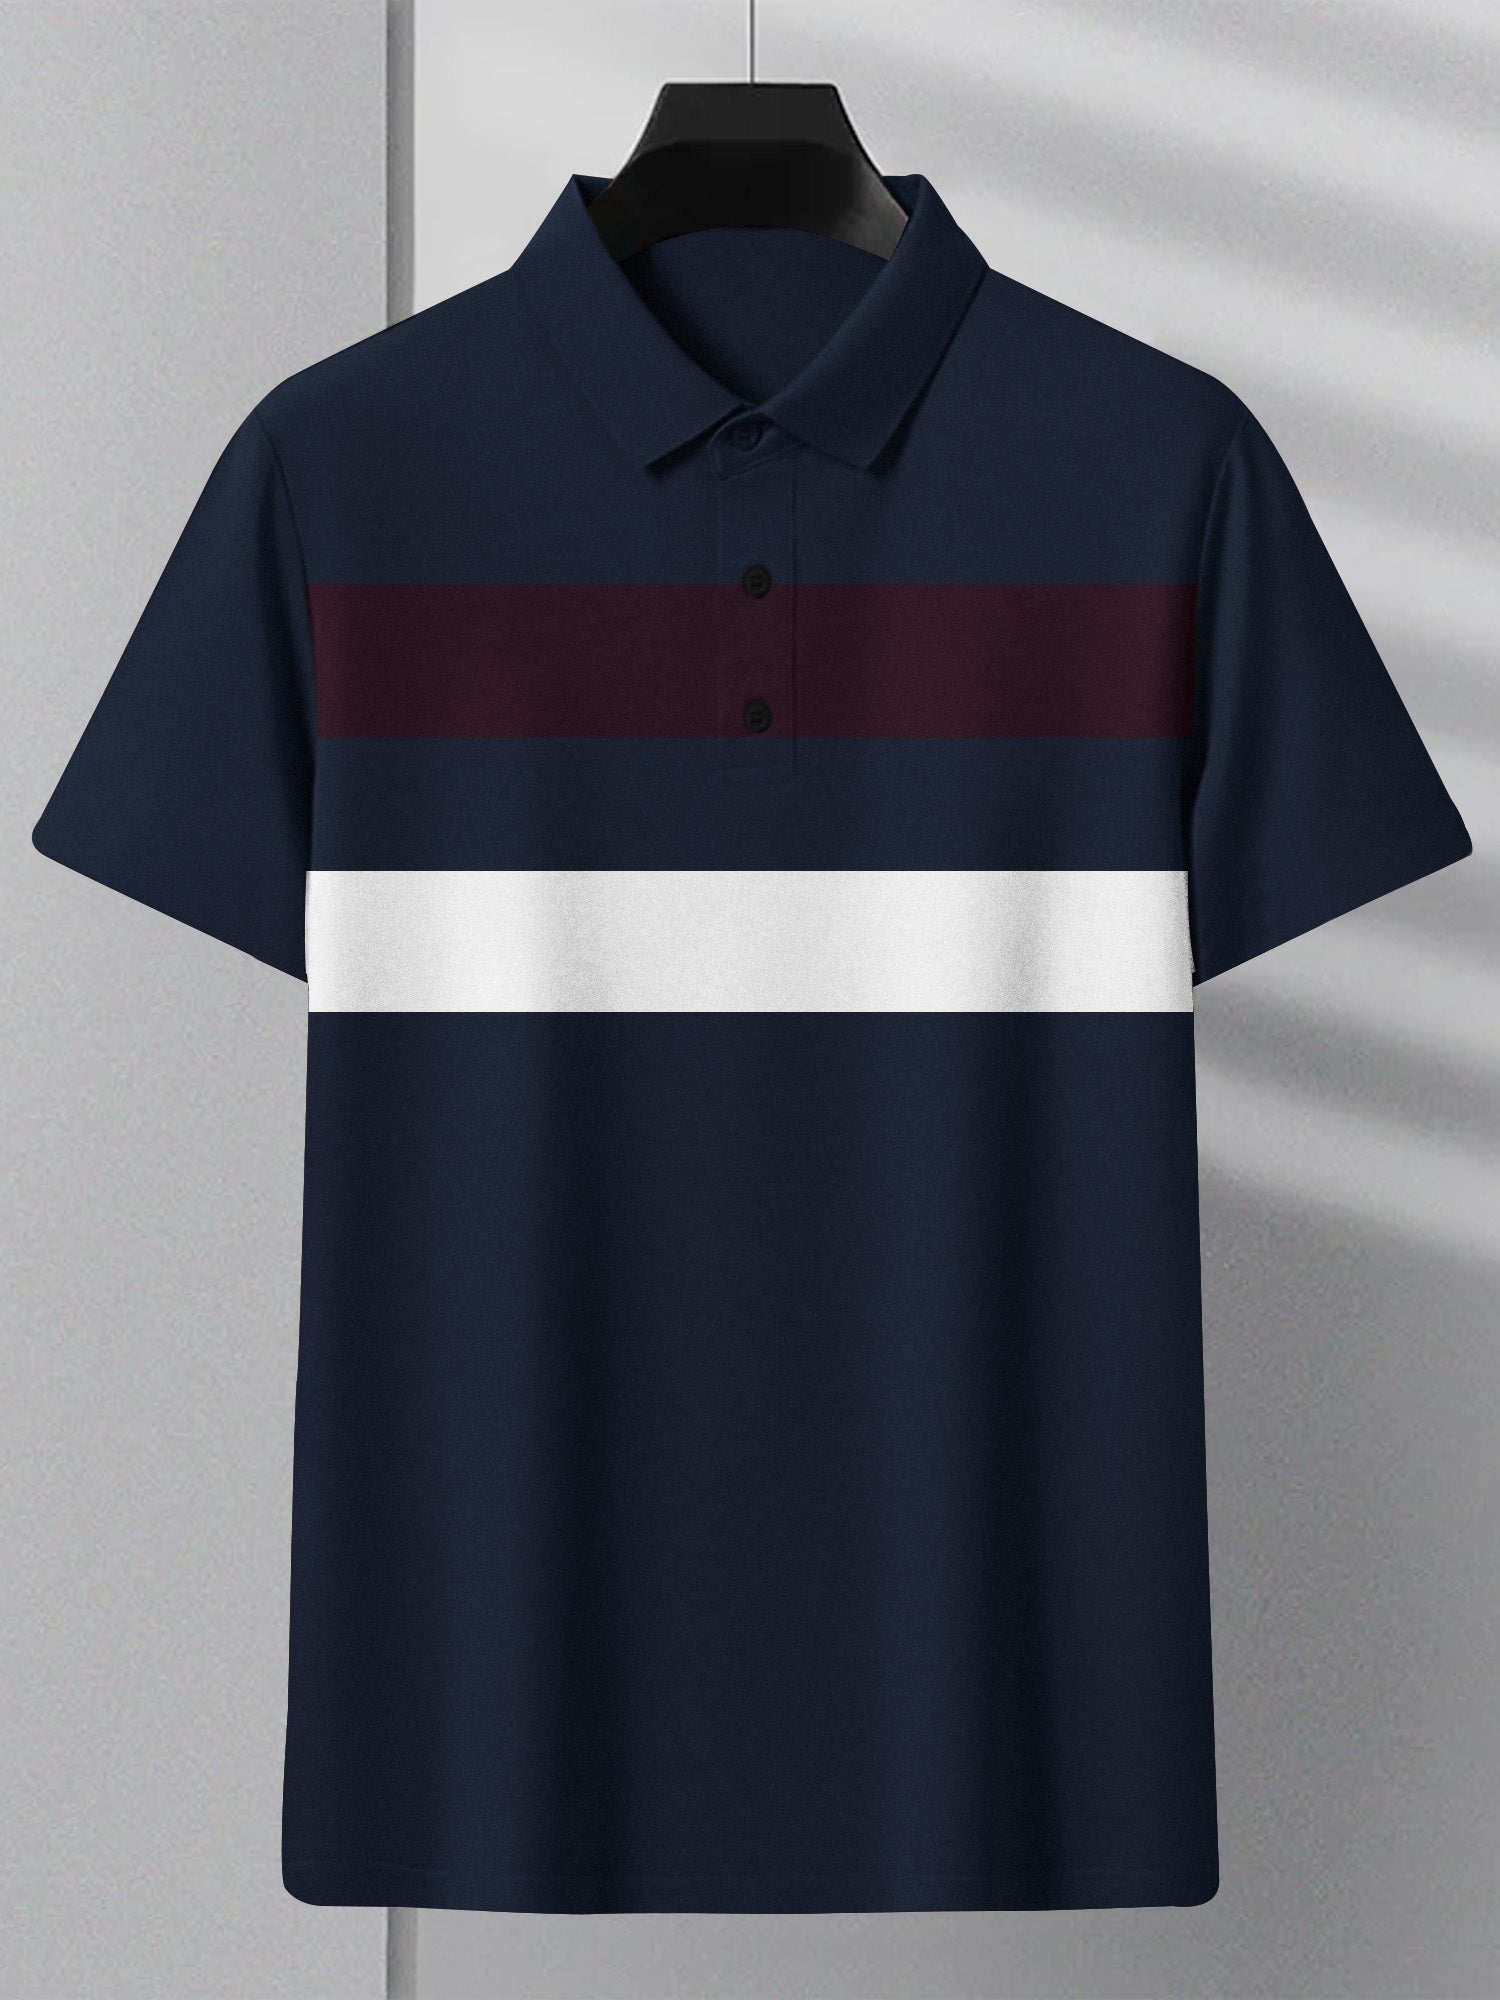 NXT Summer Polo Shirt For Men-Dark Navy With White & Maroon Stripe-BE799/BR13040